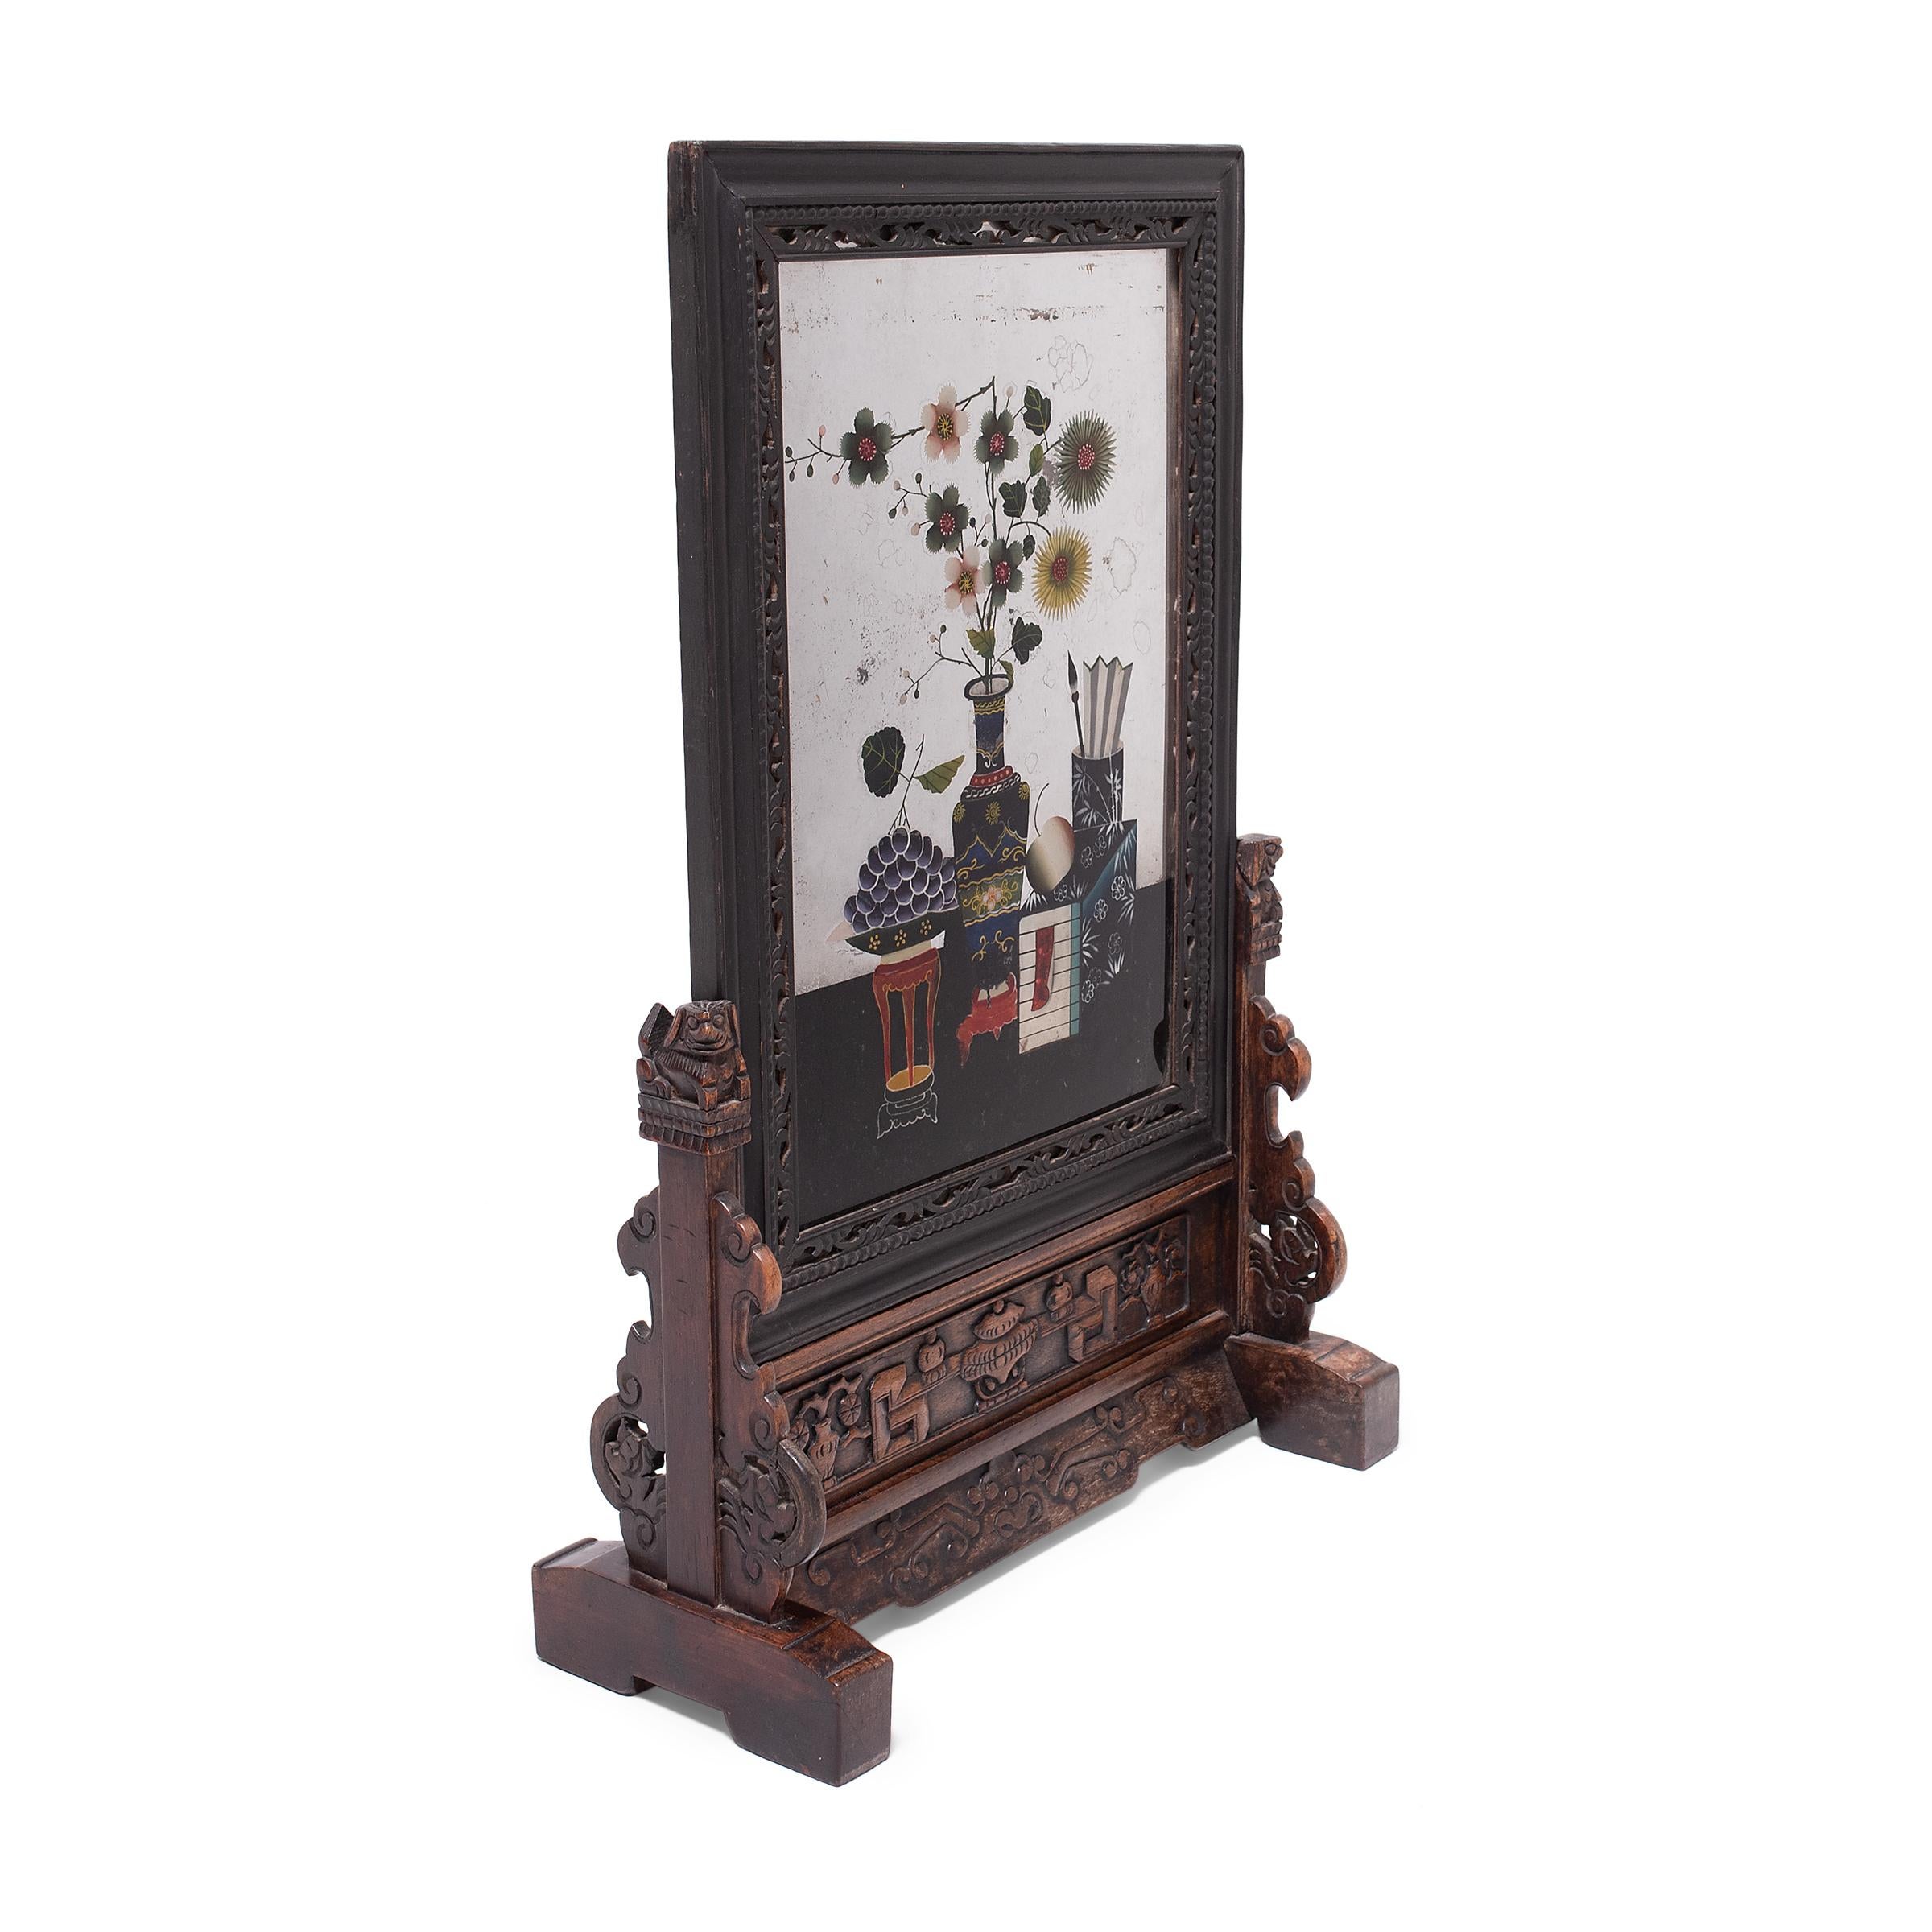 Prevalent in fine Chinese interiors as early as the Tang dynasty (618-906), standing screens with decorative panels served numerous functions as portable architecture. Used to section off a room or as a backdrop to a throne or floral arrangement,